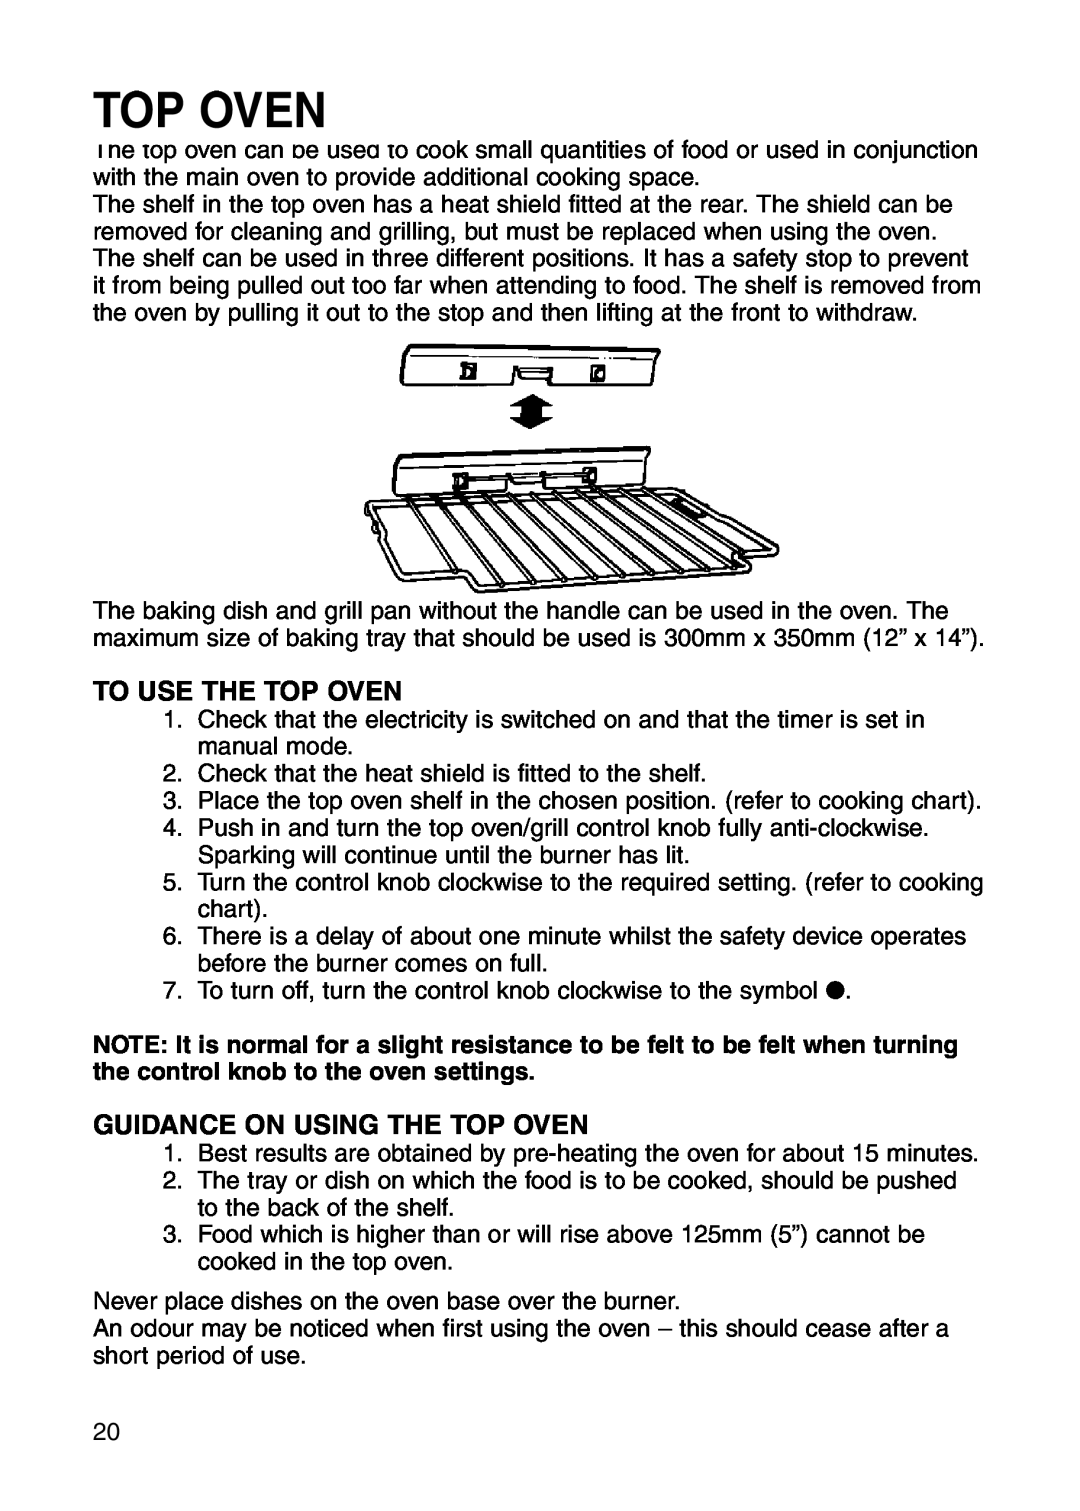 Hotpoint GW81 manual To Use The Top Oven, Guidance On Using The Top Oven 